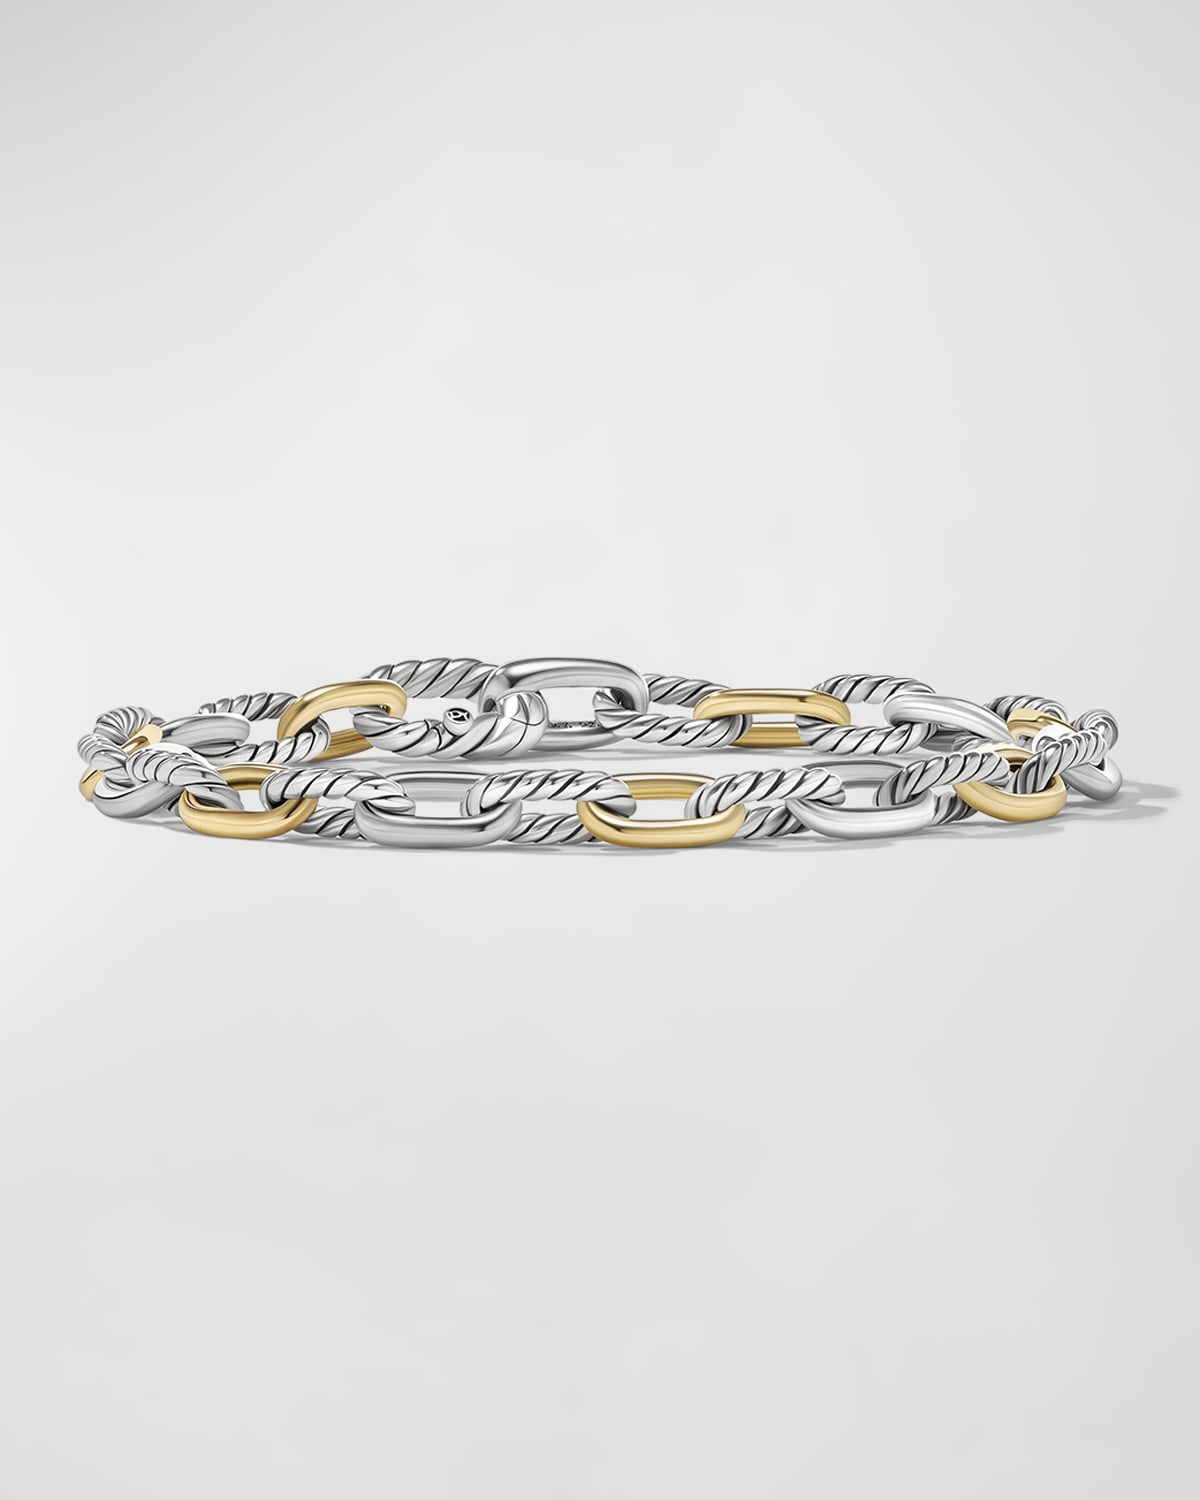 DY Madison Chain Bracelet in Silver with 18K Gold, 5.5mm